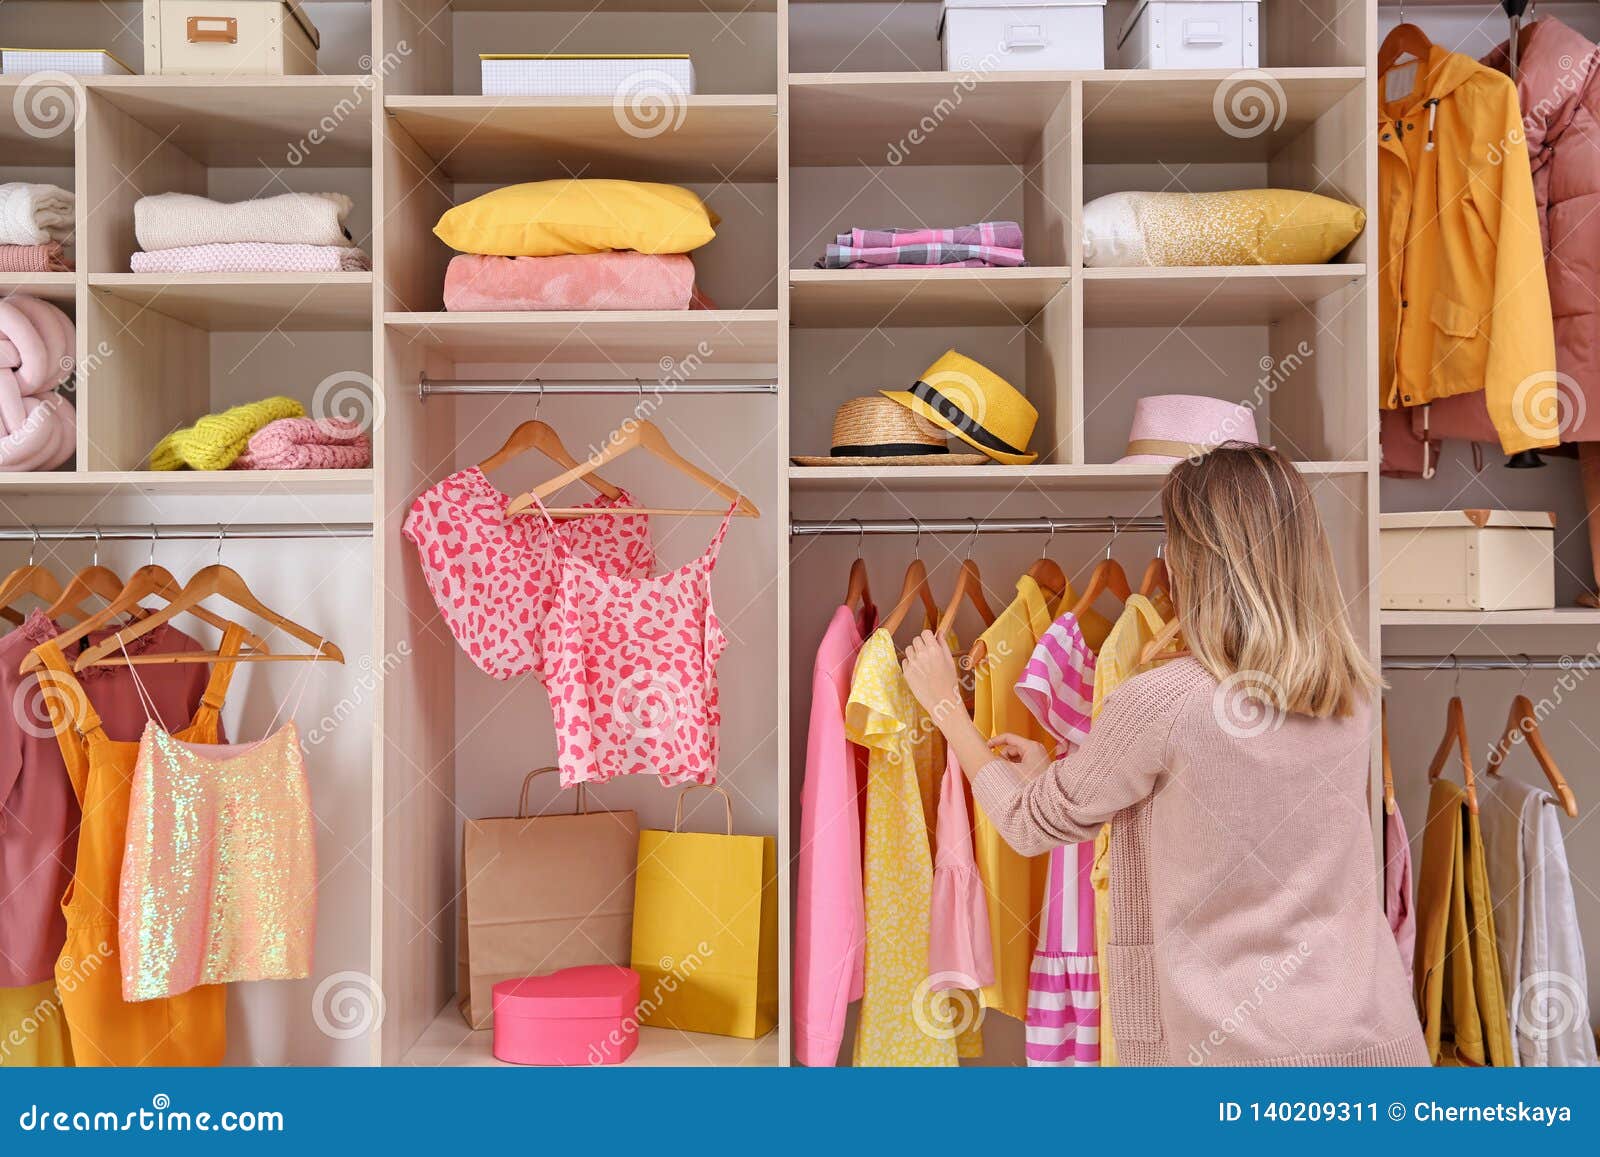 woman choosing clothes from large wardrobe